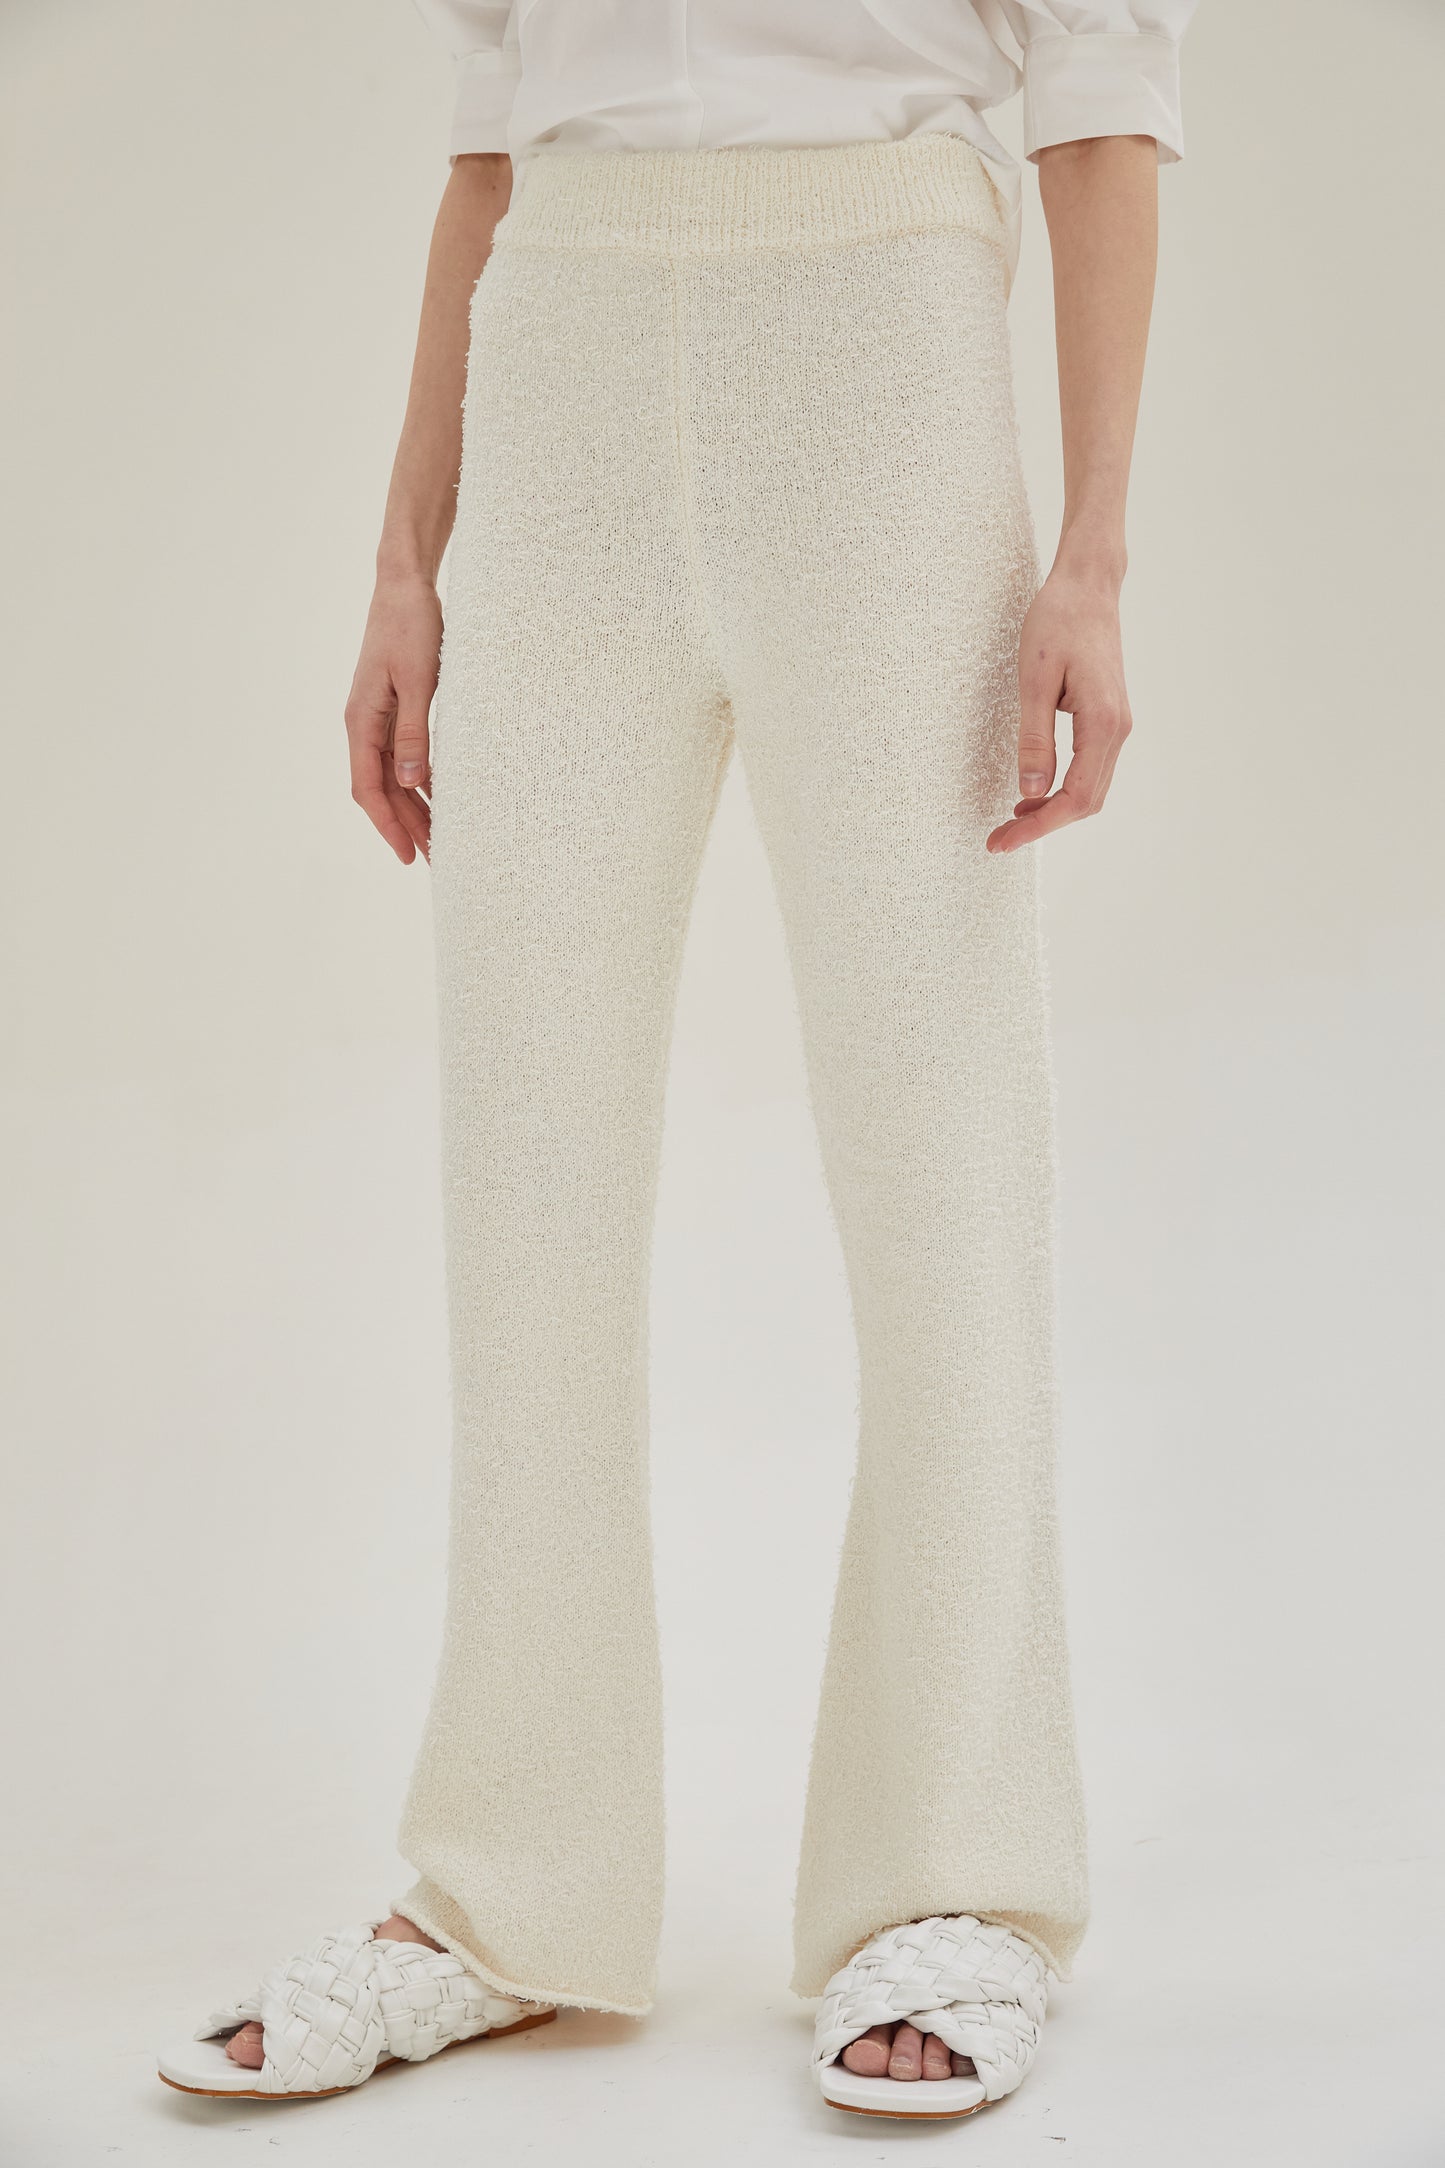 Pull-On Knit Pants, Creme